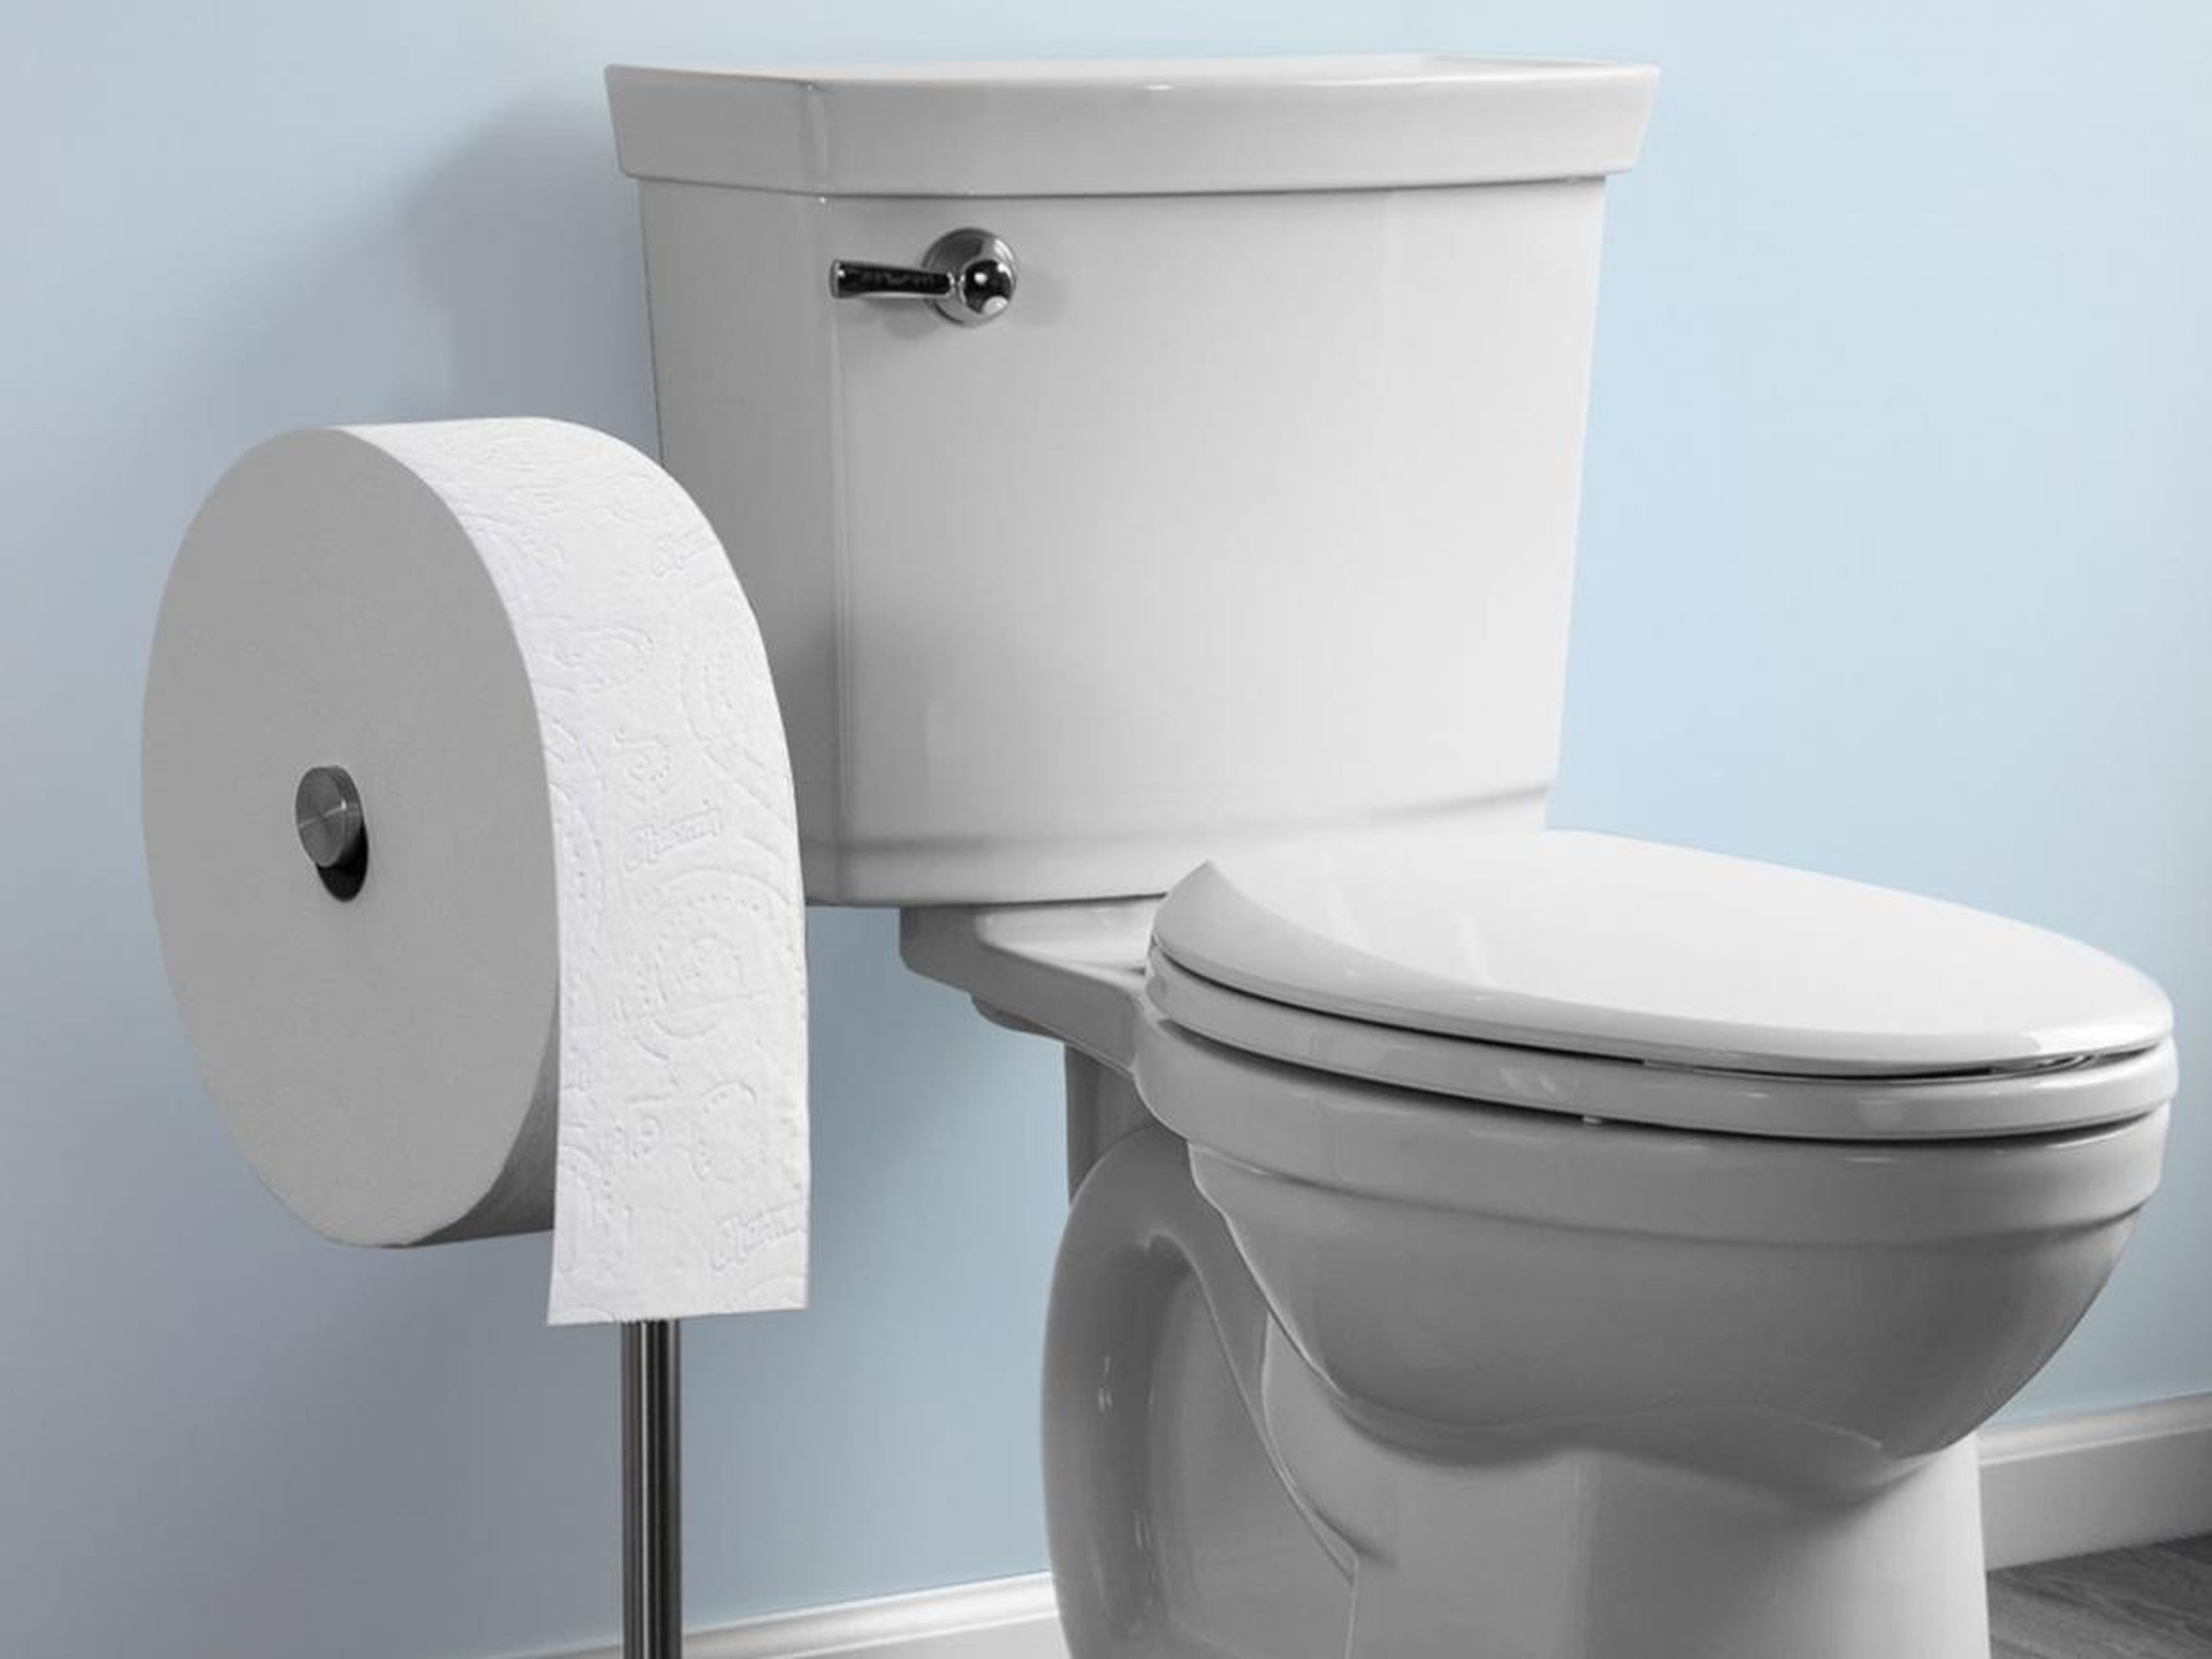 Charmin created a toilet-paper roll for millennials that lasts up to 3 months